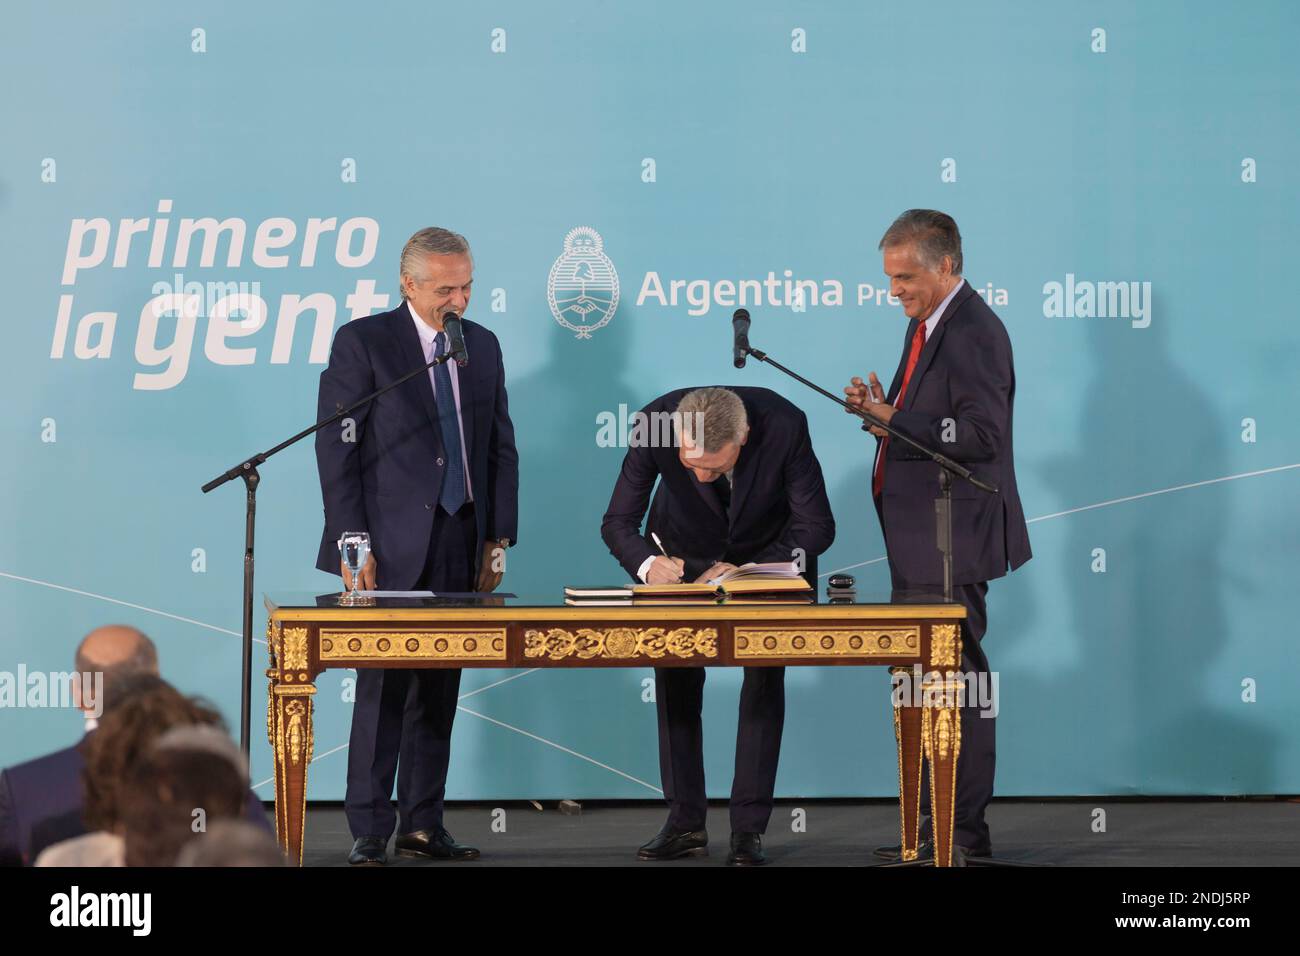 Buenos Aires, Argentina. 15th February, 2023. The President of the Nation Alberto Fernandez swore in the new Chief of Ministers of the Nation Agustín Rossi. Stock Photo